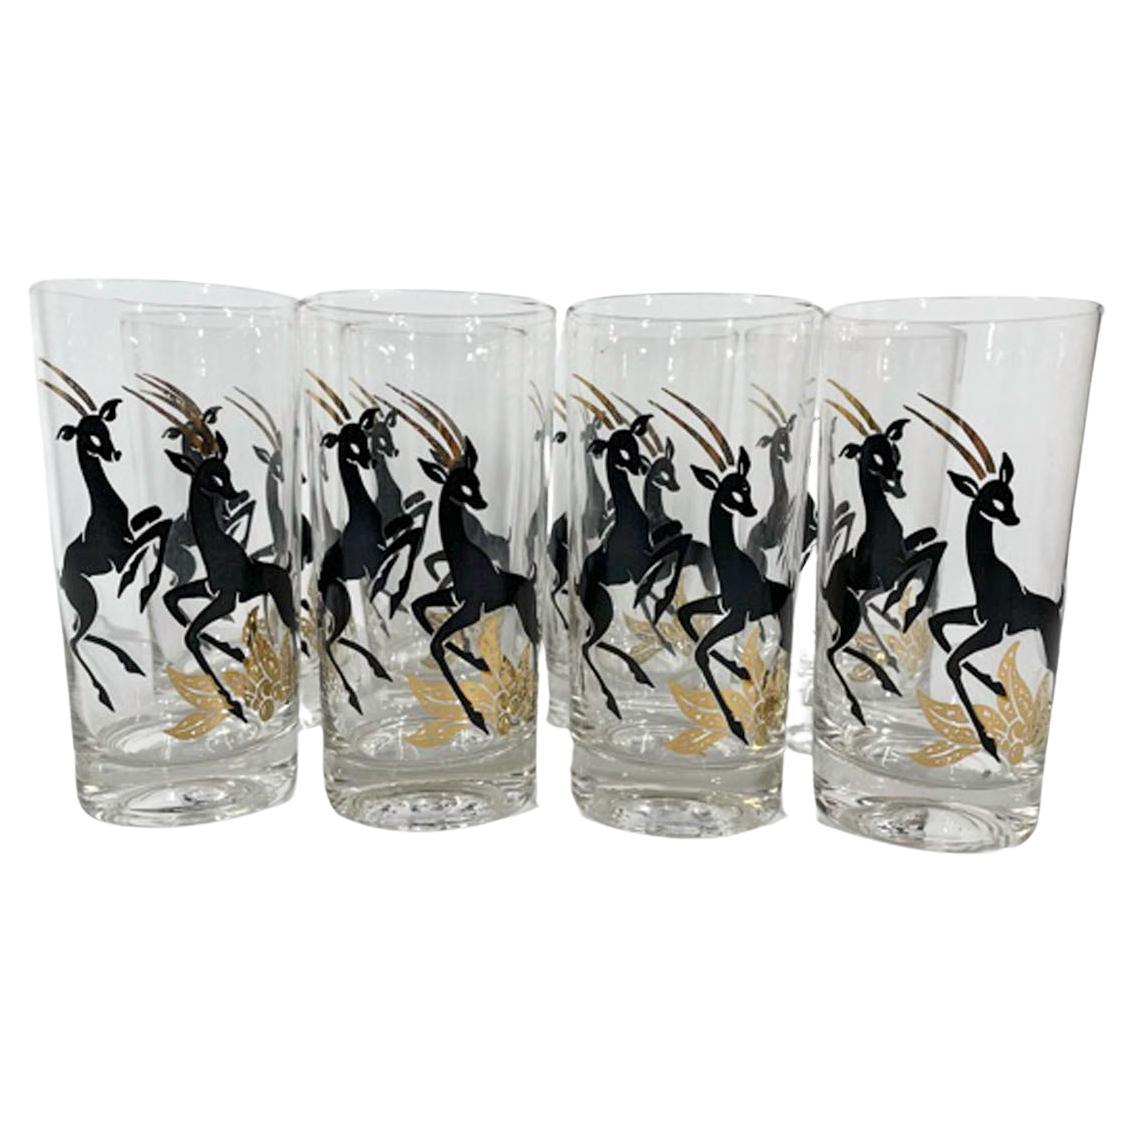 Vintage Highball Glasses with Black Enamel Antelopes with Gold Detail